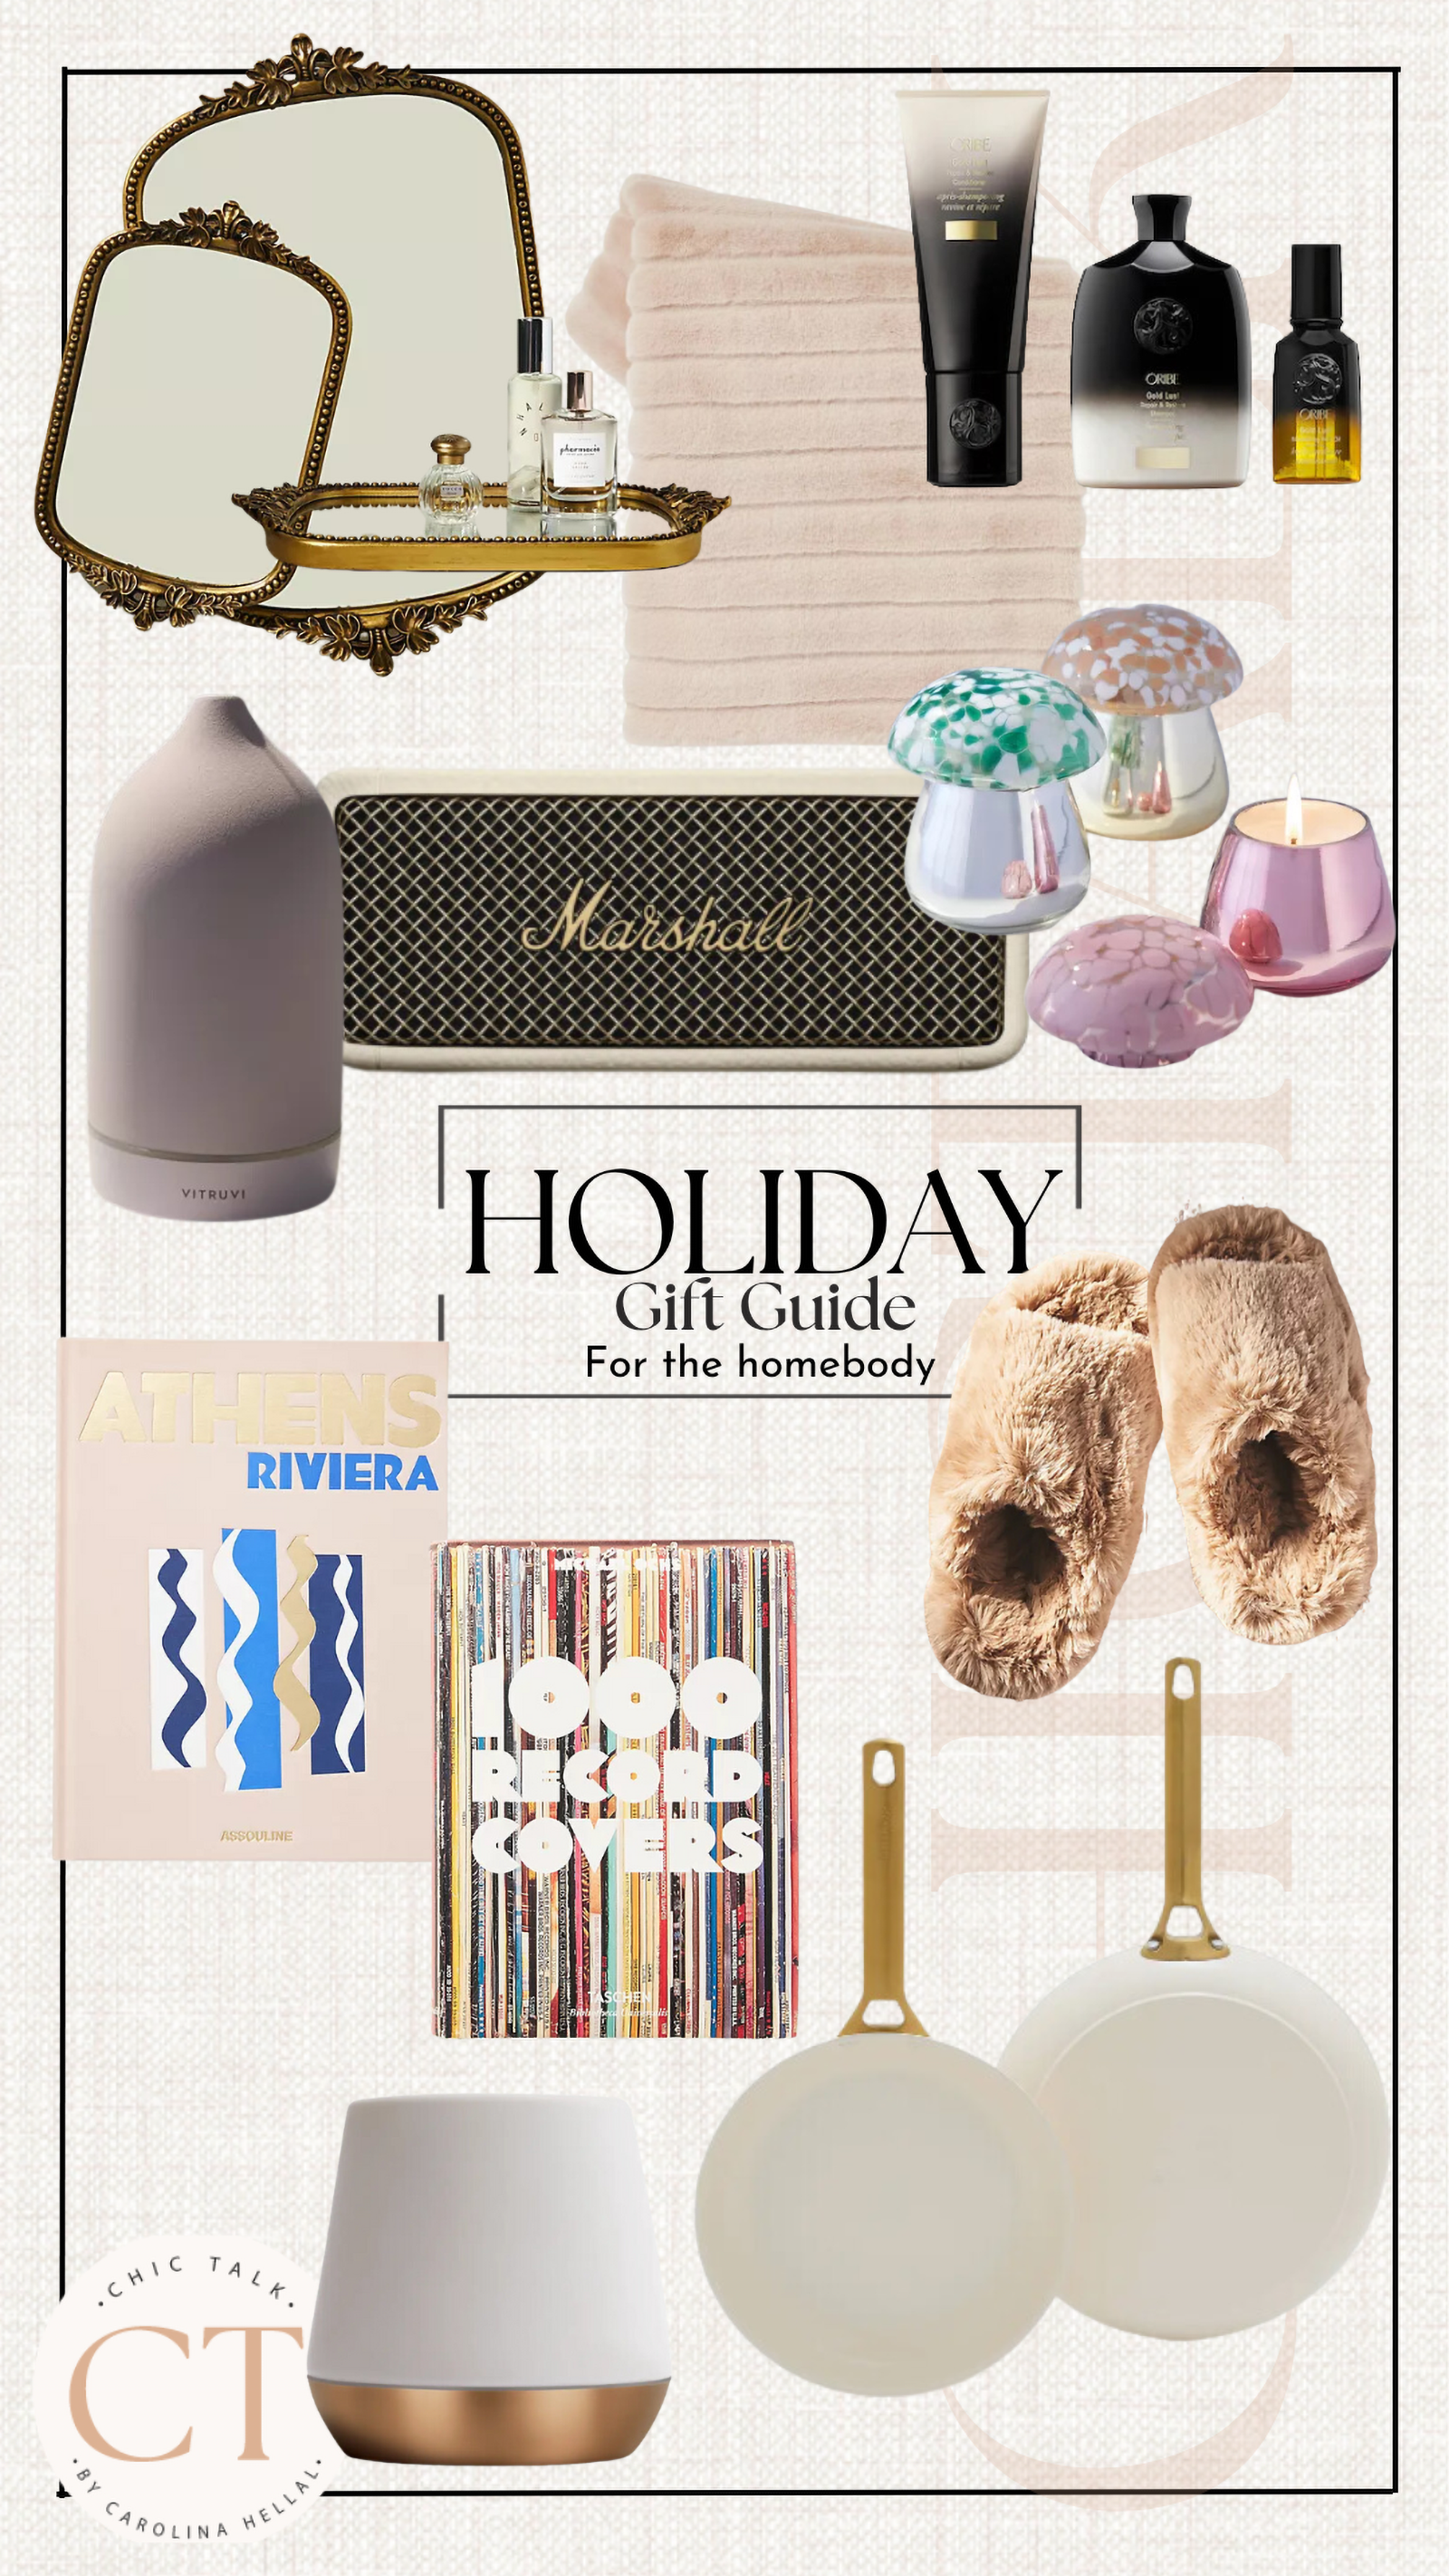 HOLIDAY GIFT GUIDE FOR THE HOMEBODY CHIC TALK